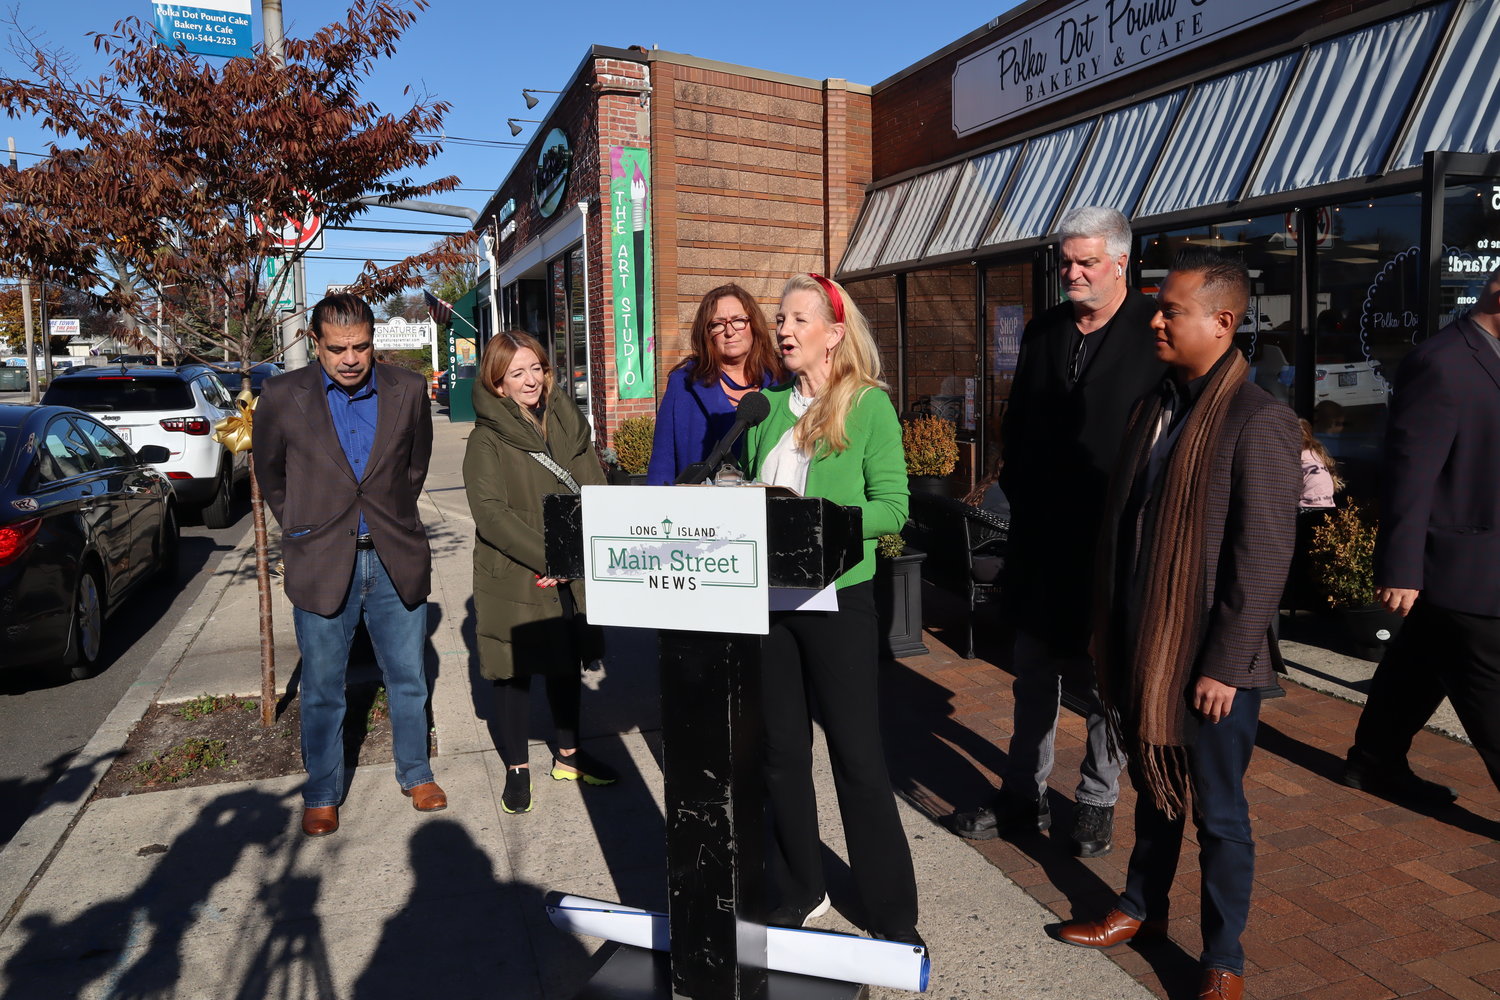 Lisa Umansky, owner of Polka Dot Pound Cake and president of the Rockville Centre Chamber of Commerce, held a news conference last Saturday to promote Small Business Saturday.